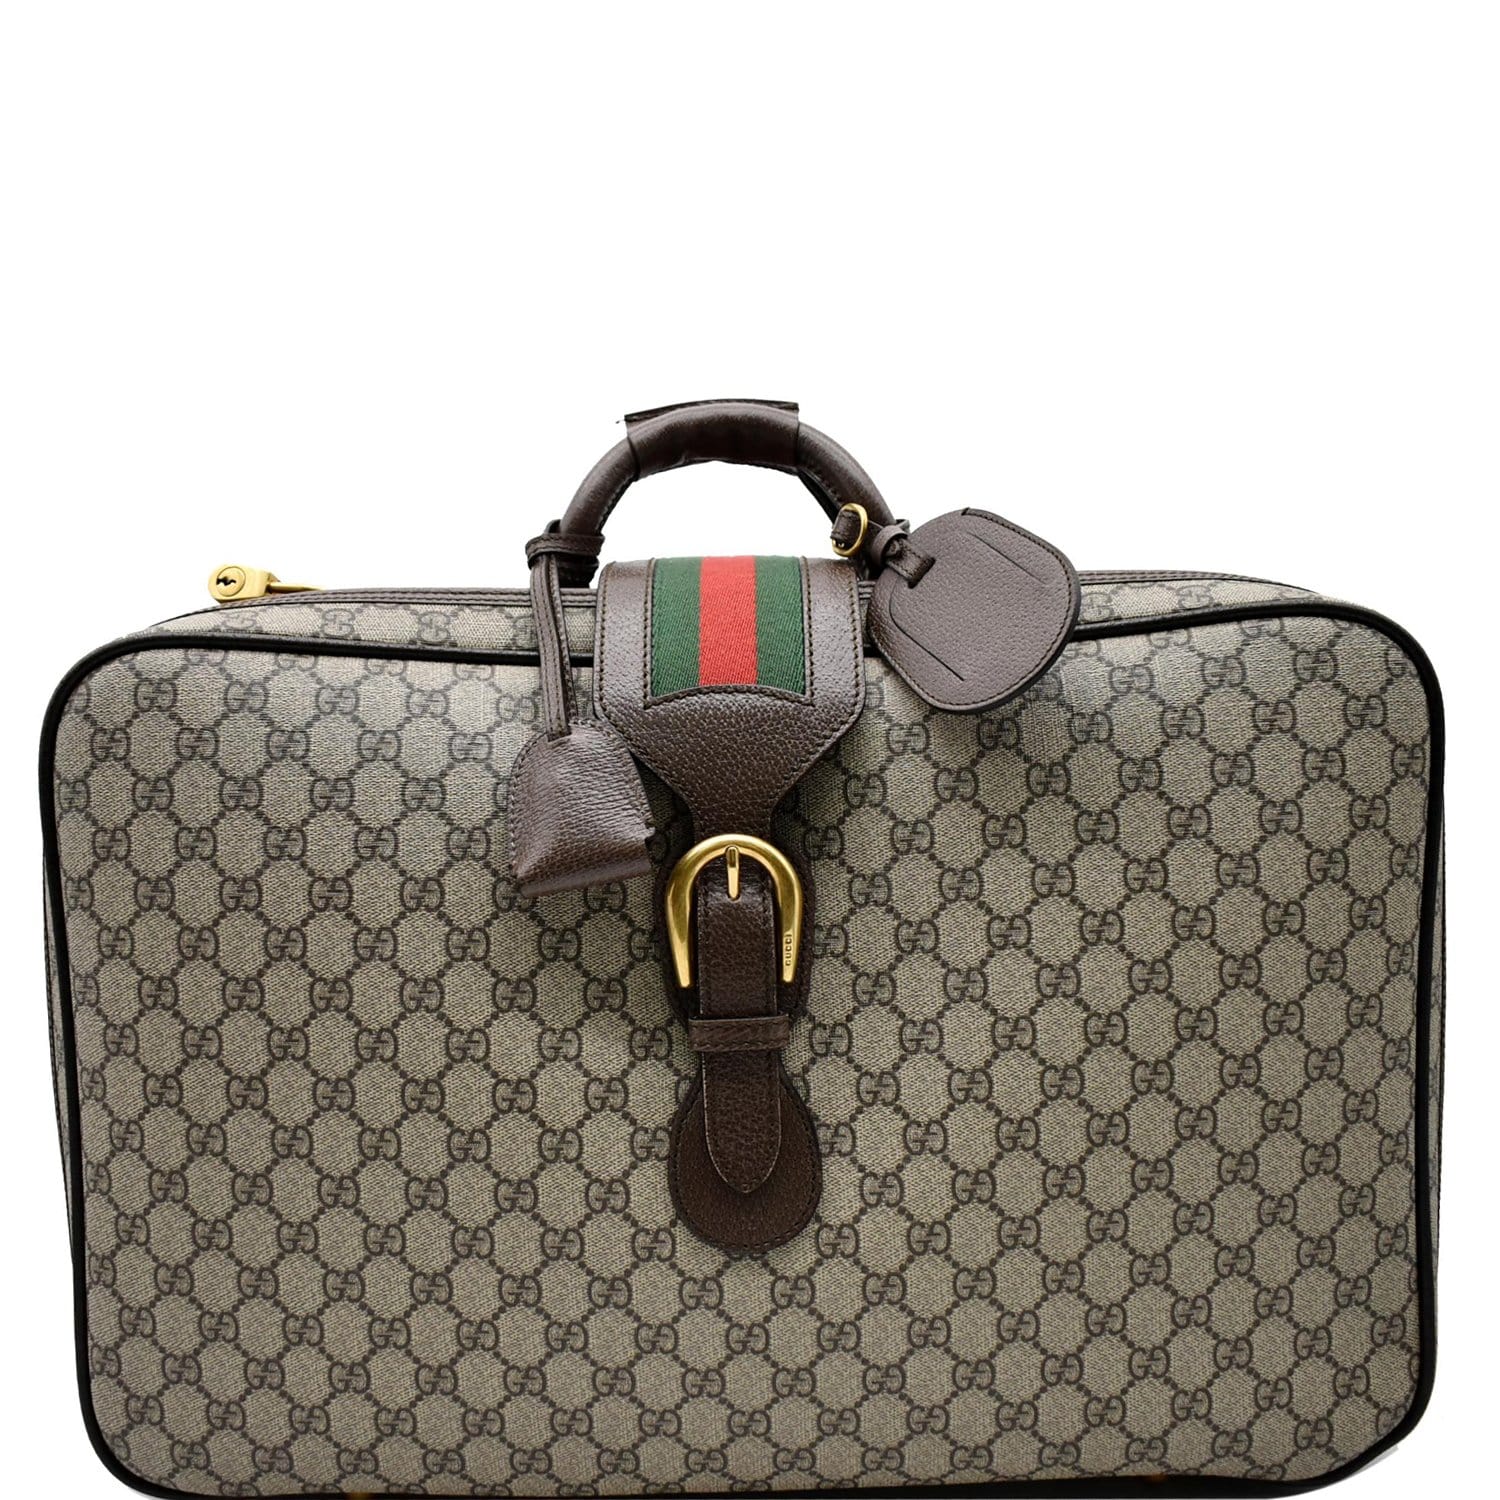 Gucci Beige/Brown GG Supreme Canvas and Leather Vintage Duffel Bag Gucci